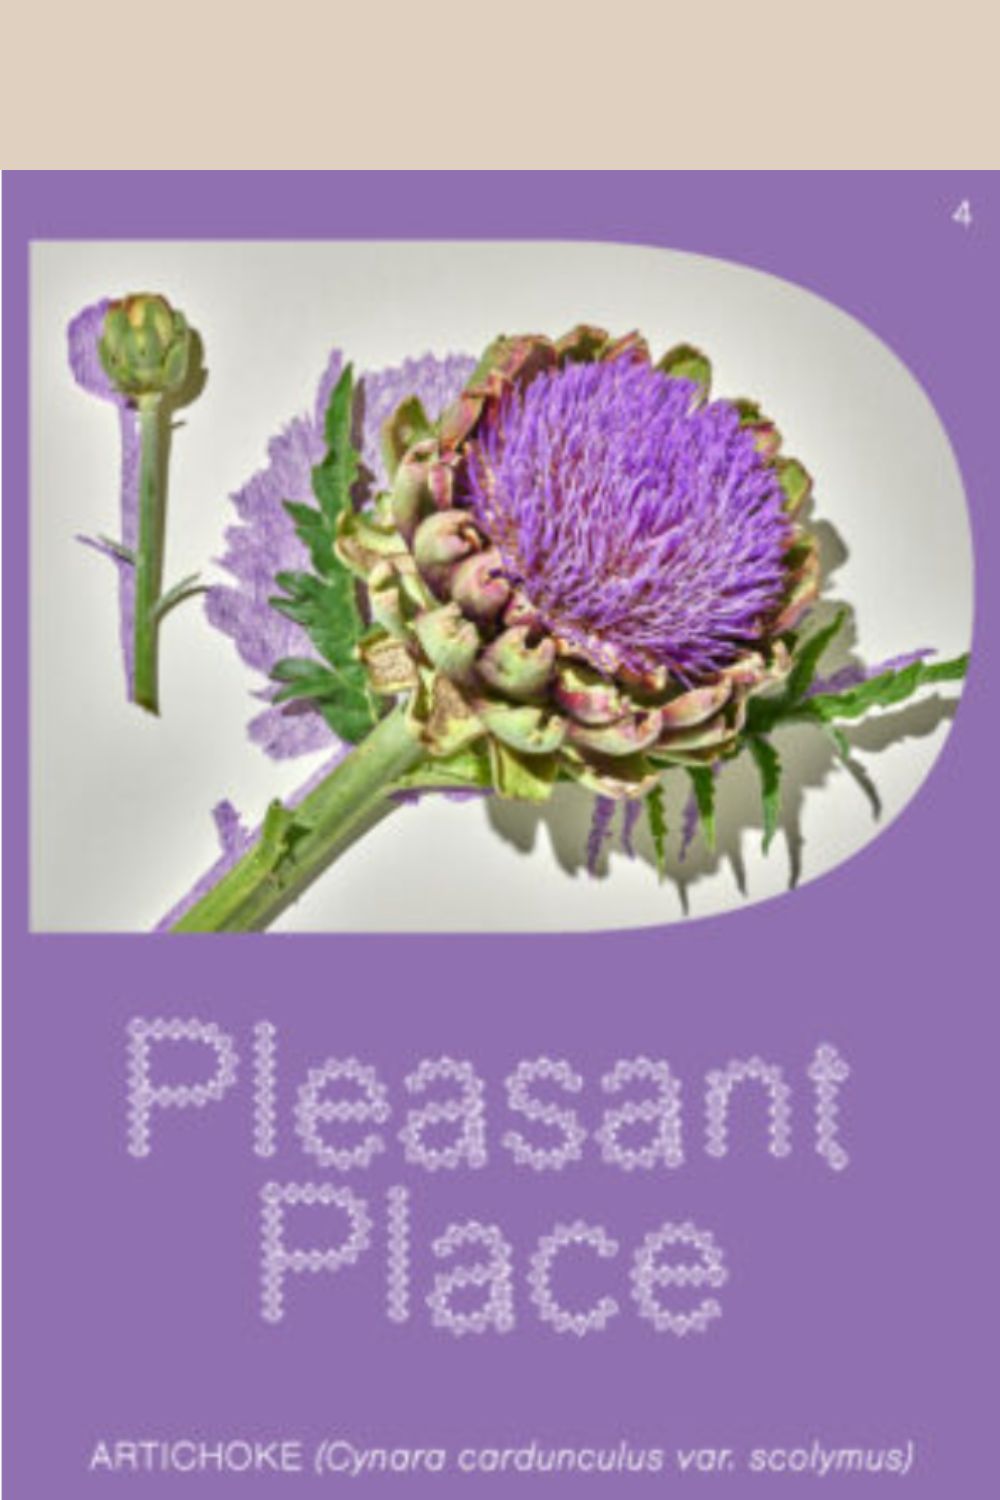 Pleasant Place Issue 4 cover (lilac background with close up of artichoke flower.